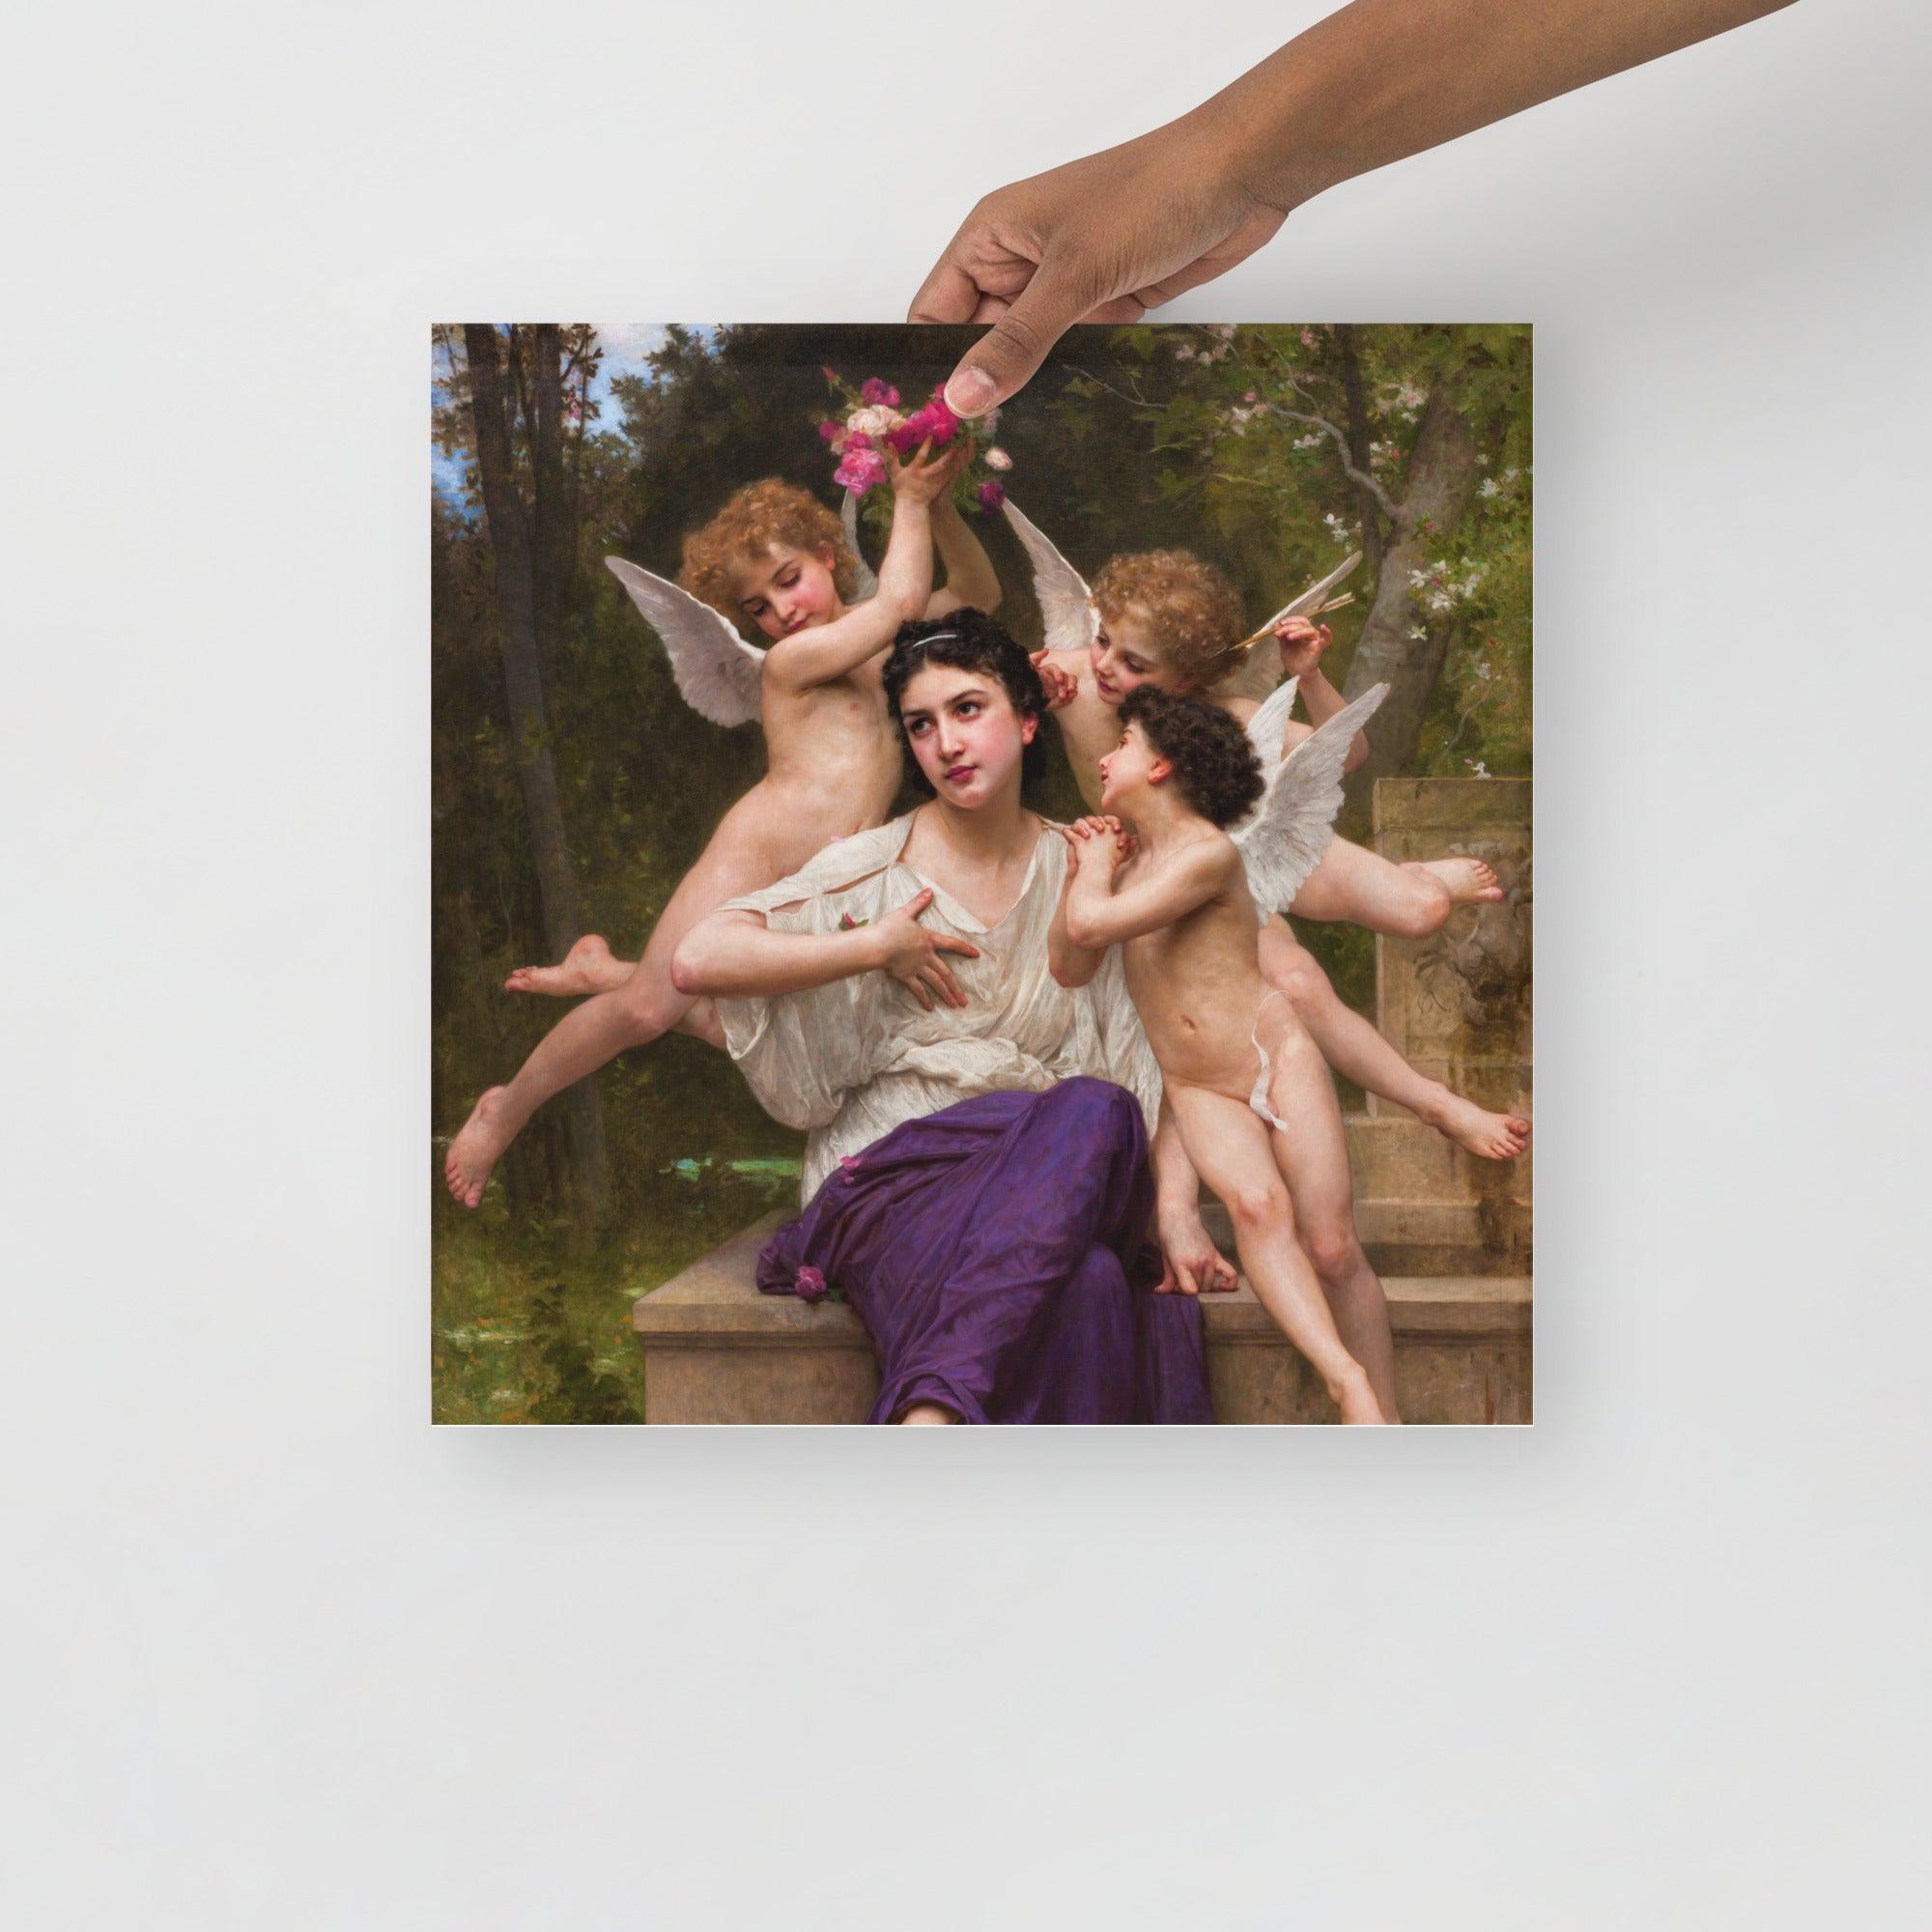 A Dream Of Spring by William Adolphe Bouguereau poster on a plain backdrop in size 16x16”.